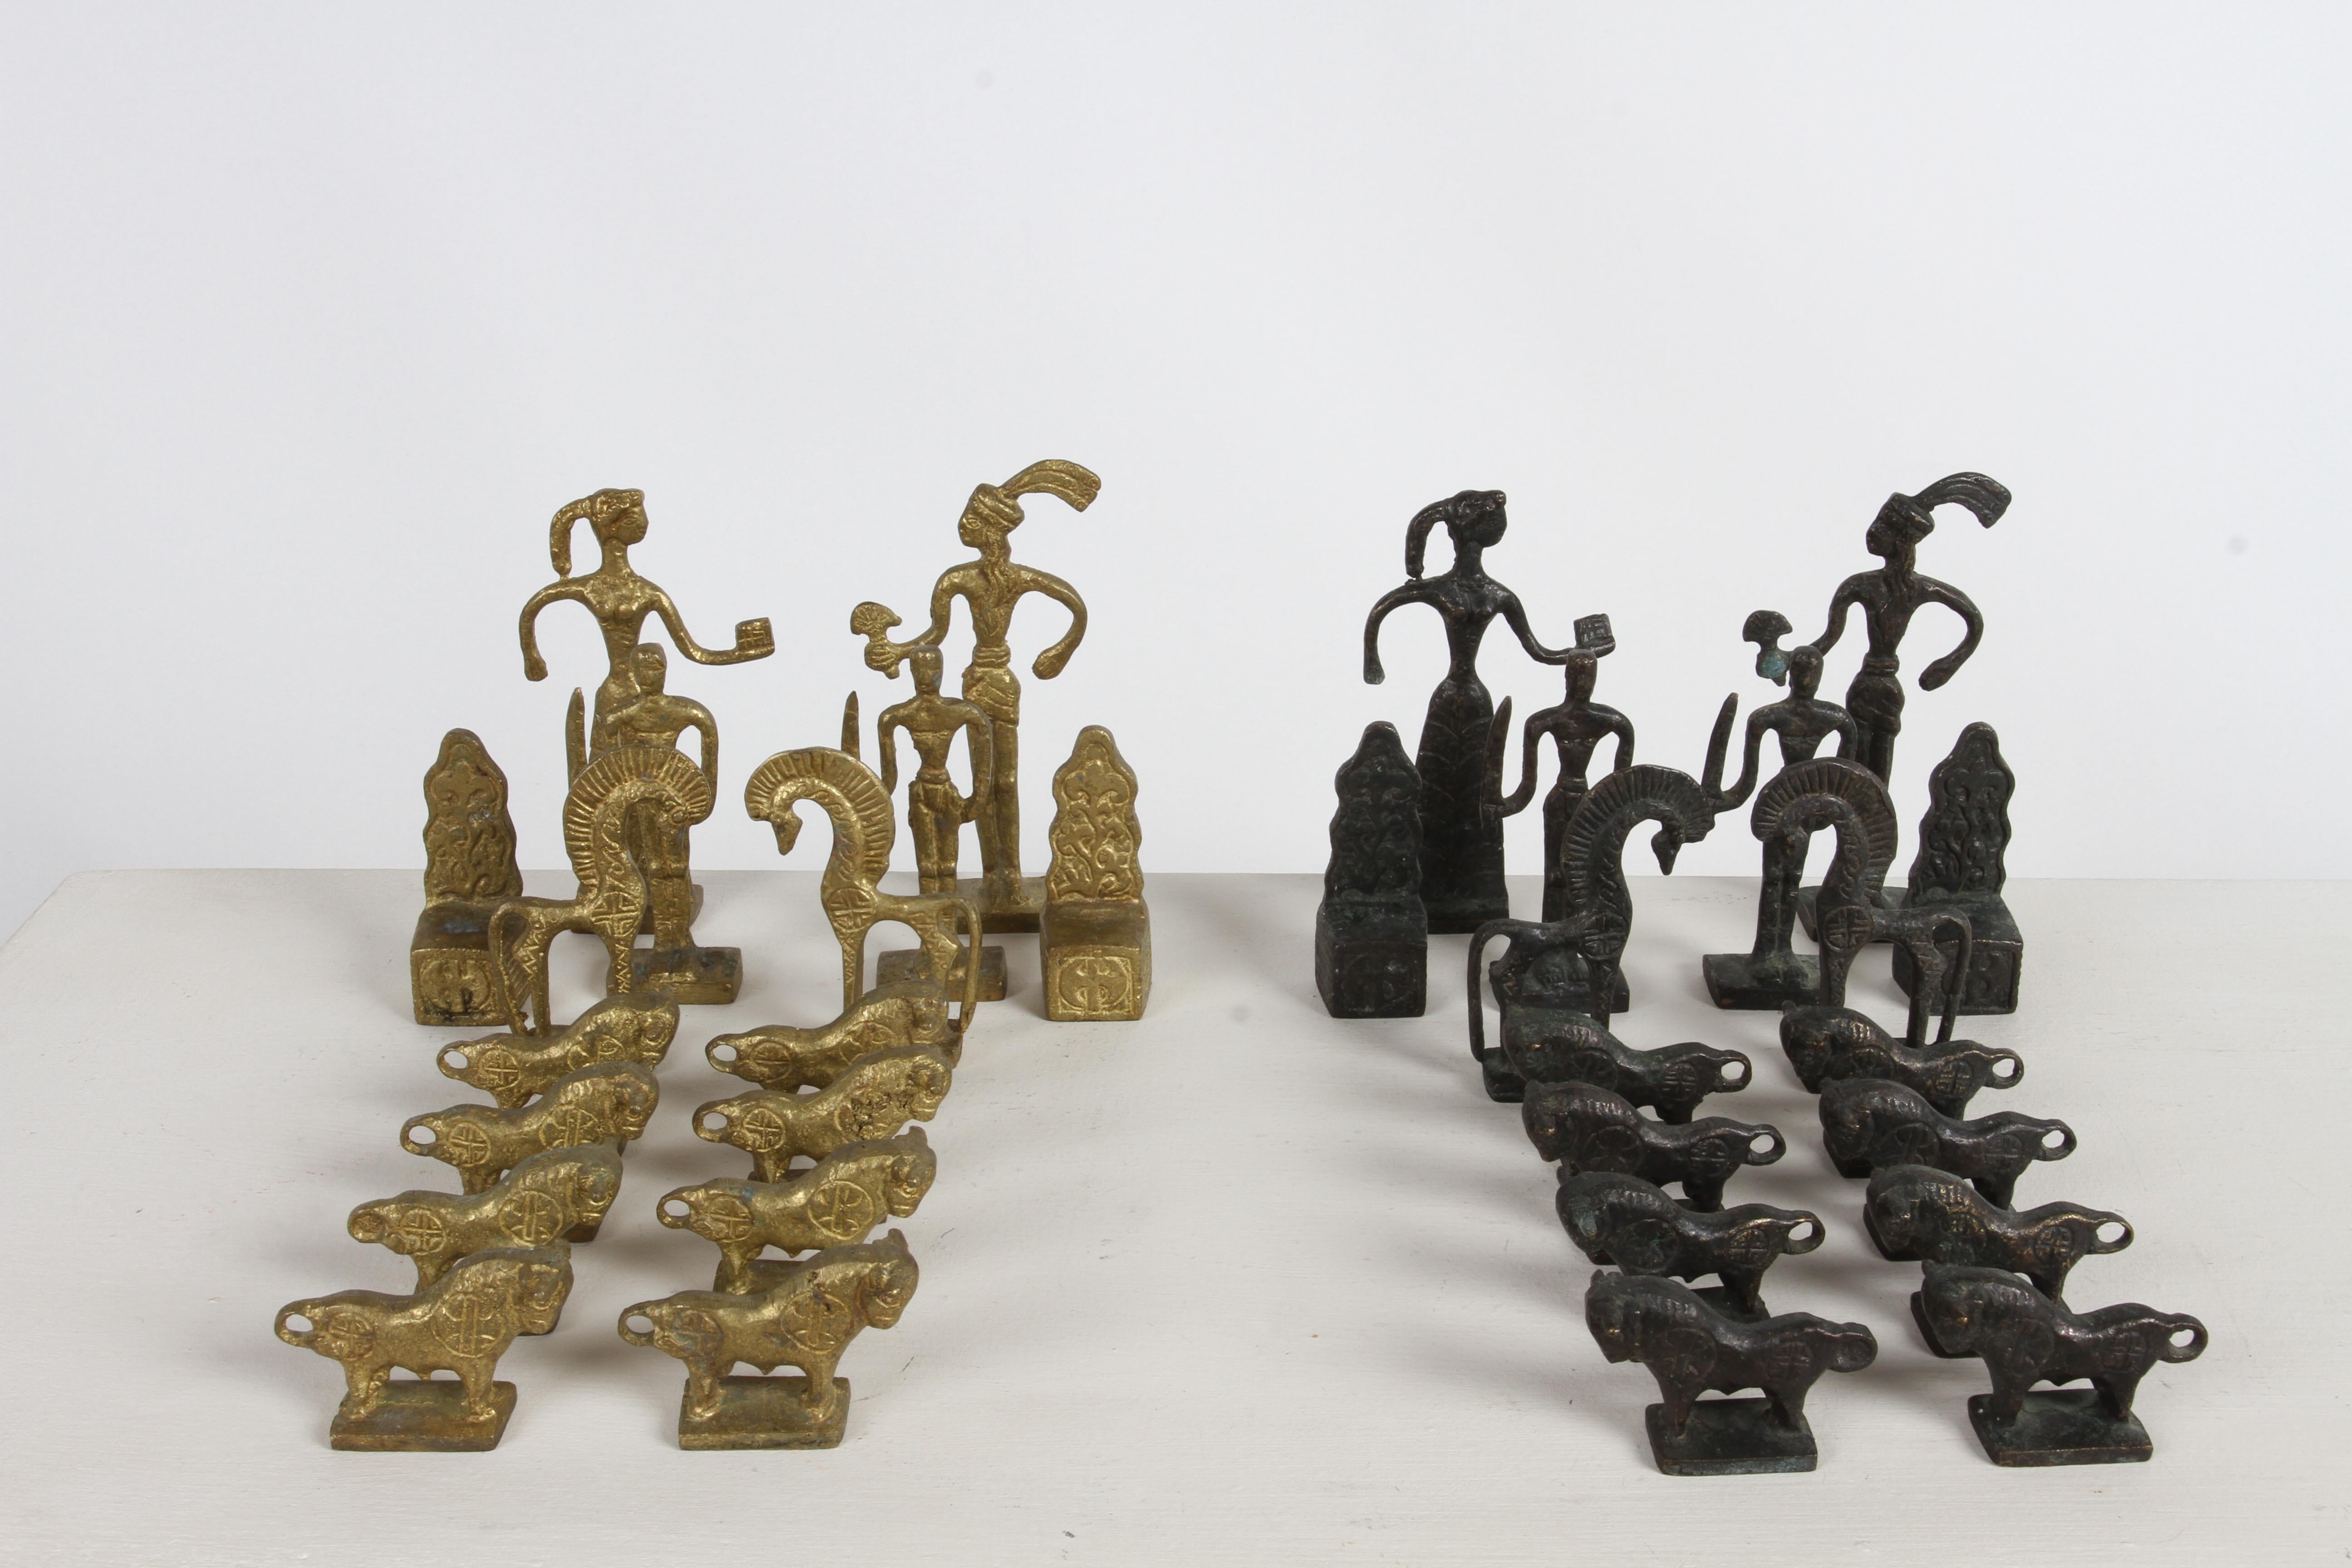 Rare handmade bronze complete chess set by Christoforus Sklavenitis, a famous Greek-Crete artist who was a student of Modigliani. The pieces were made with the lost-wax method, one side is natural bronze, the other oxidized, tallest being 5.5